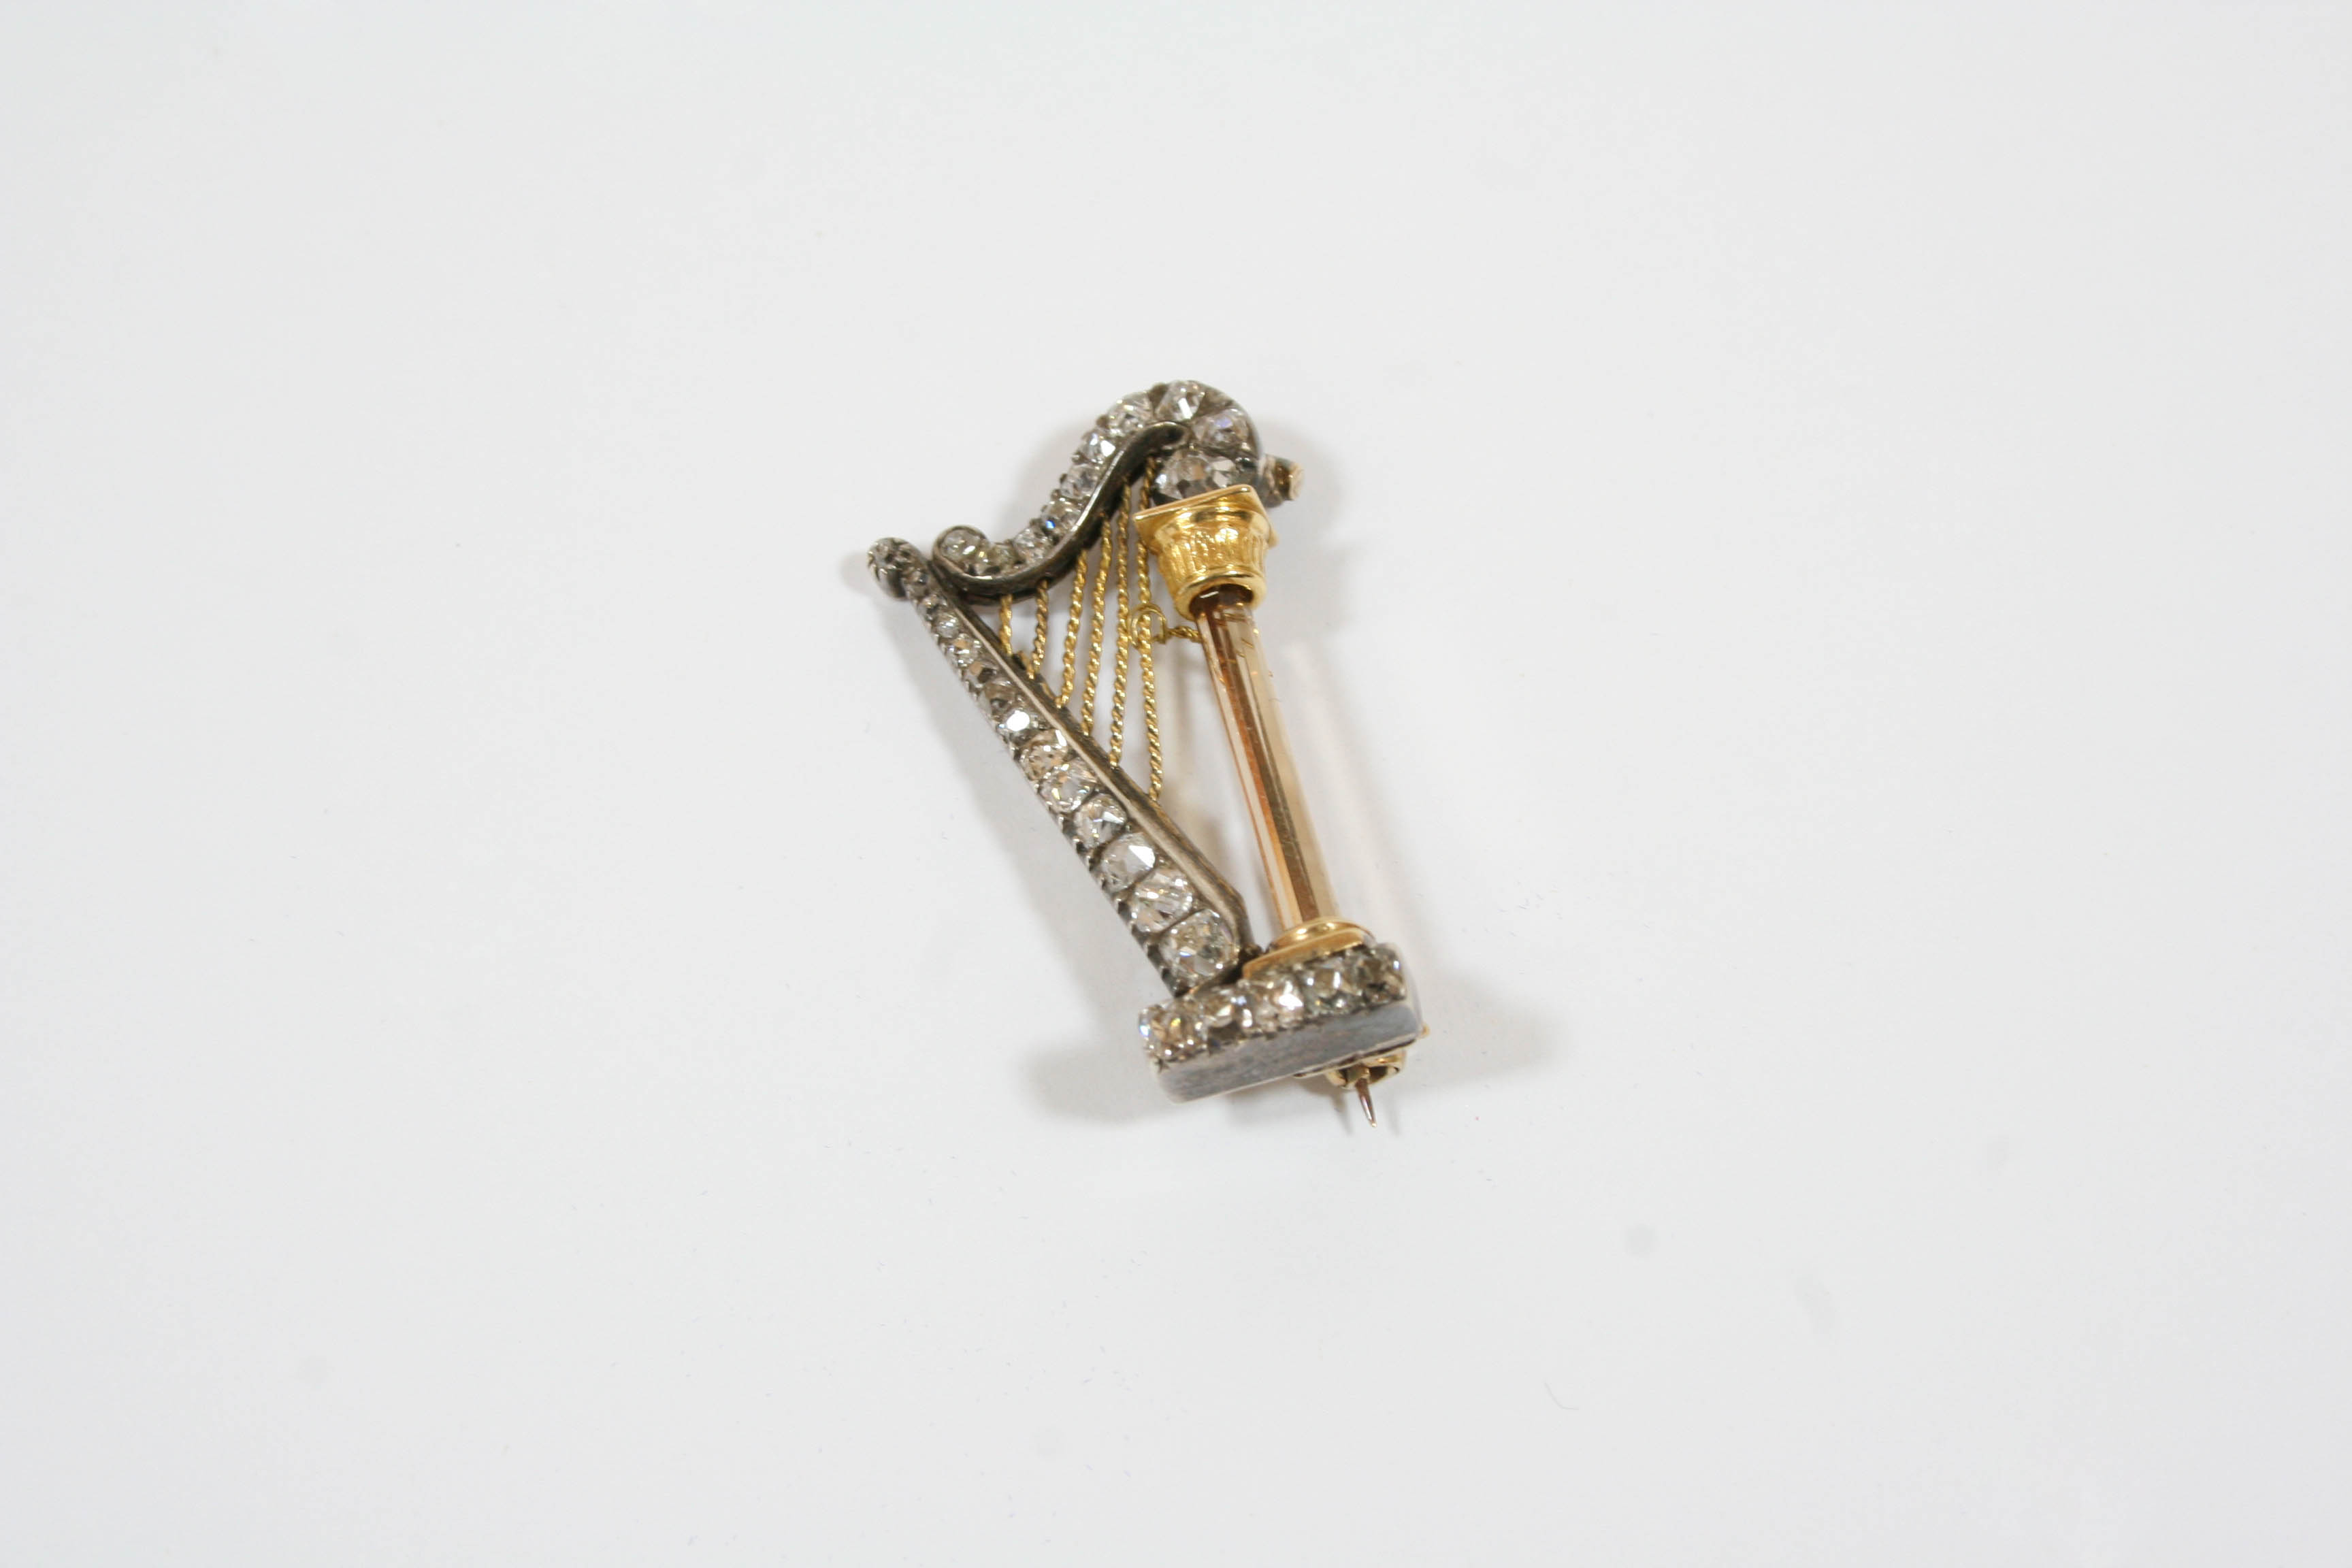 A VICTORIAN DIAMOND HARP BROOCH mounted with graduated old brilliant-cut diamonds, set in silver and